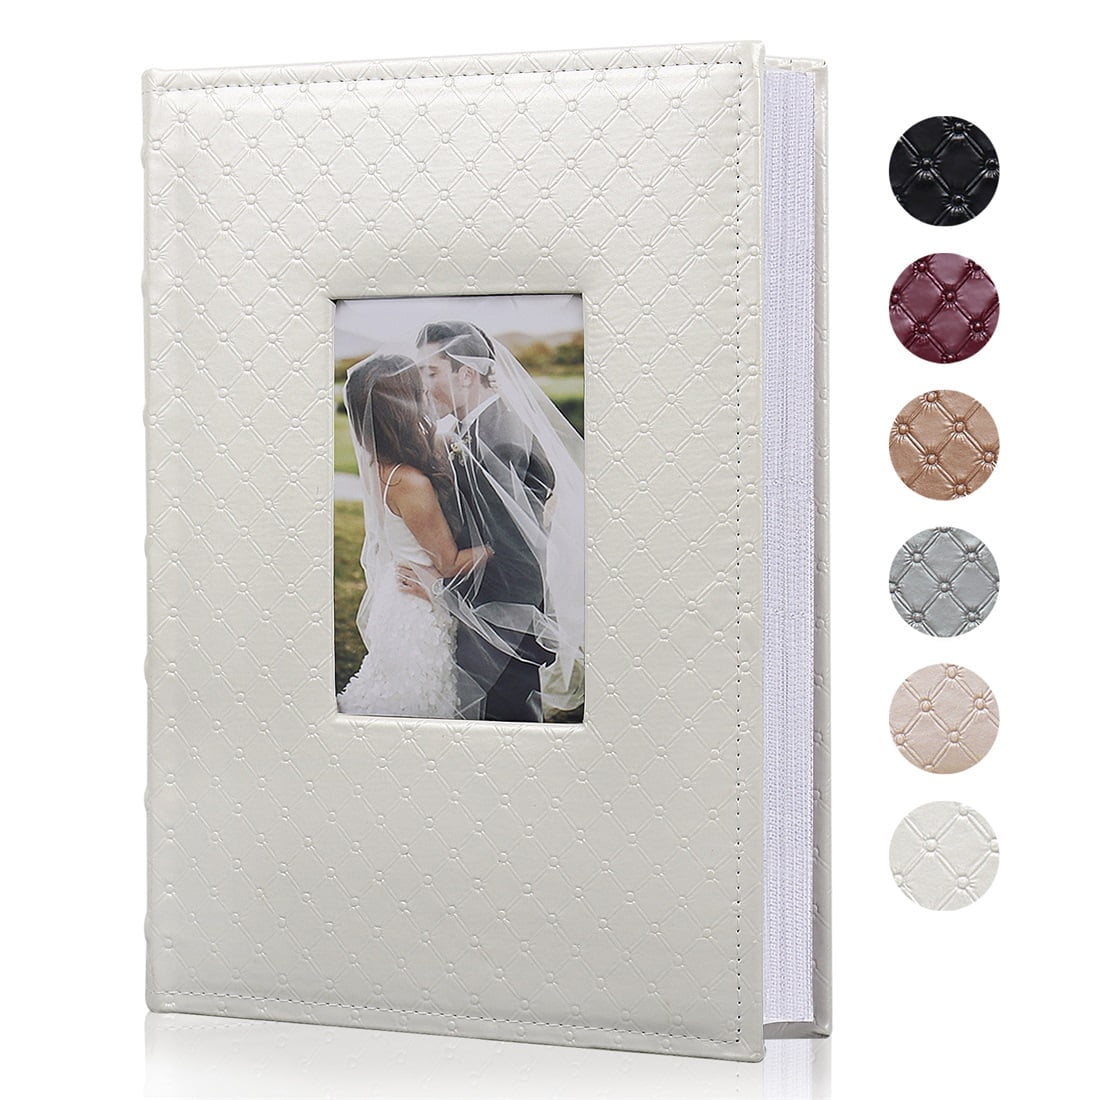 OUR WEDDING 3-ring pocket embossed white proof book for up to 300 4x6  photos - 4x6